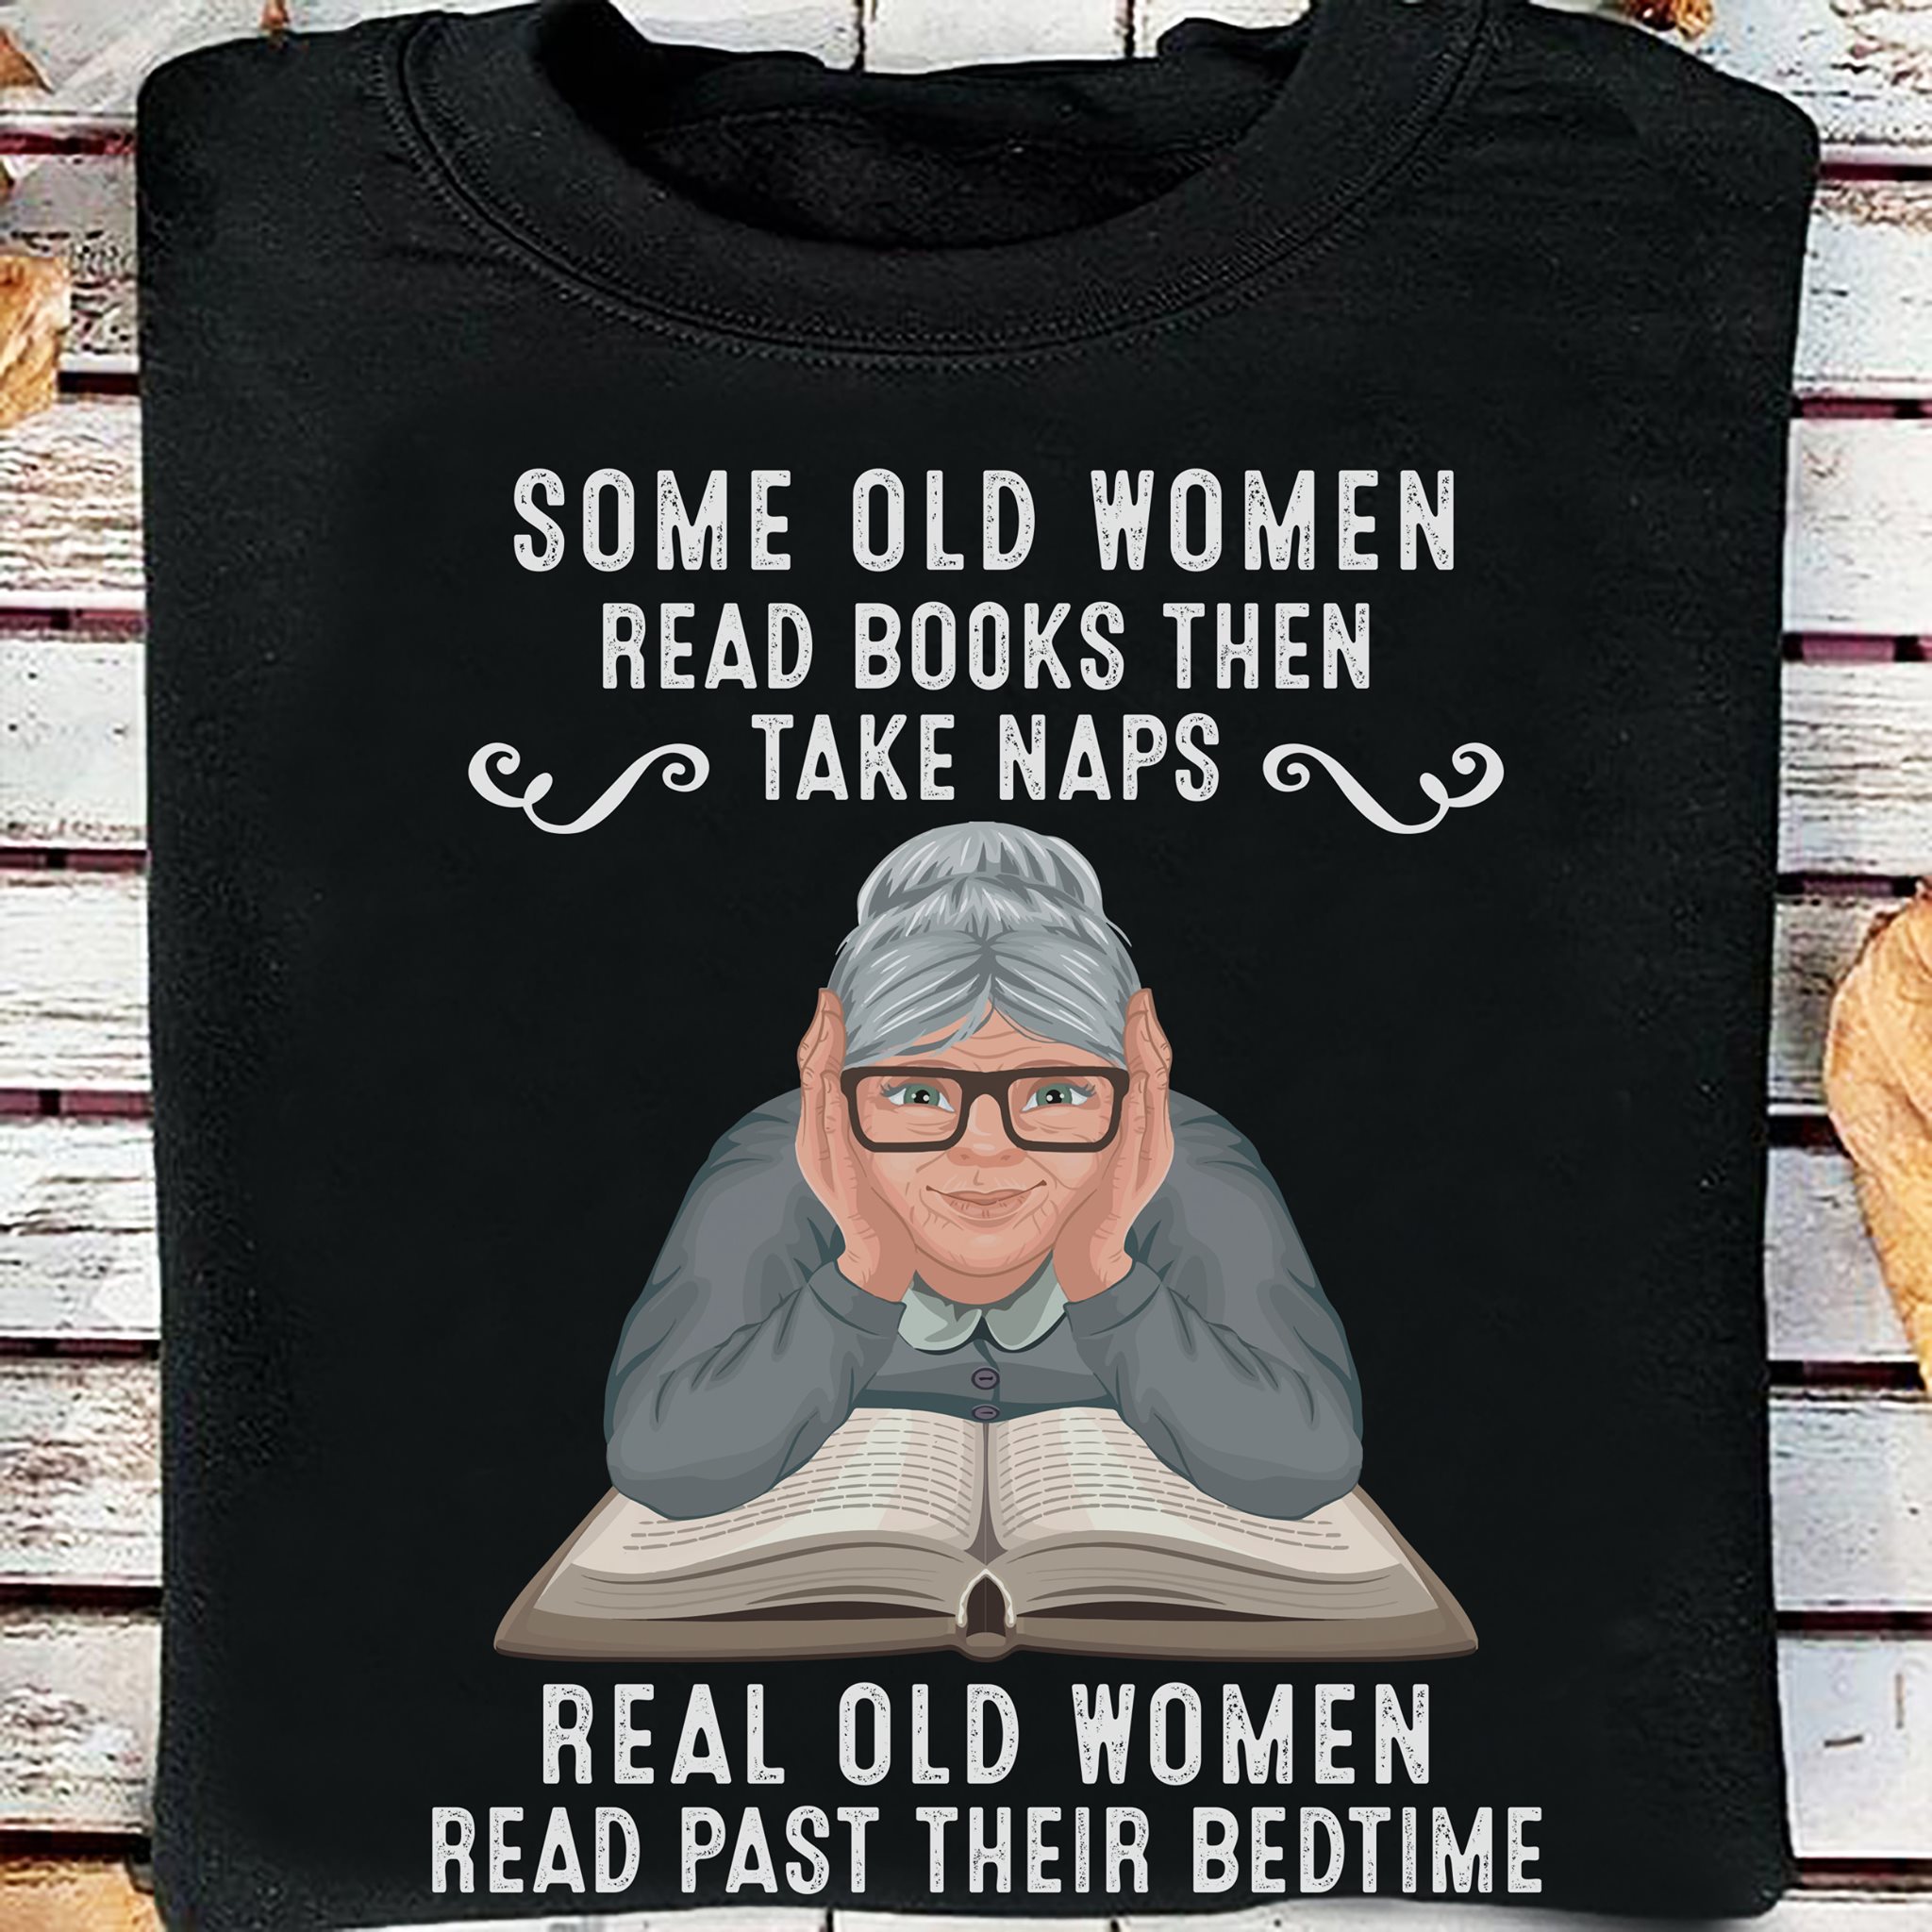 Some old women read books then take naps, real old women read past their bedtime - Old woman riding books